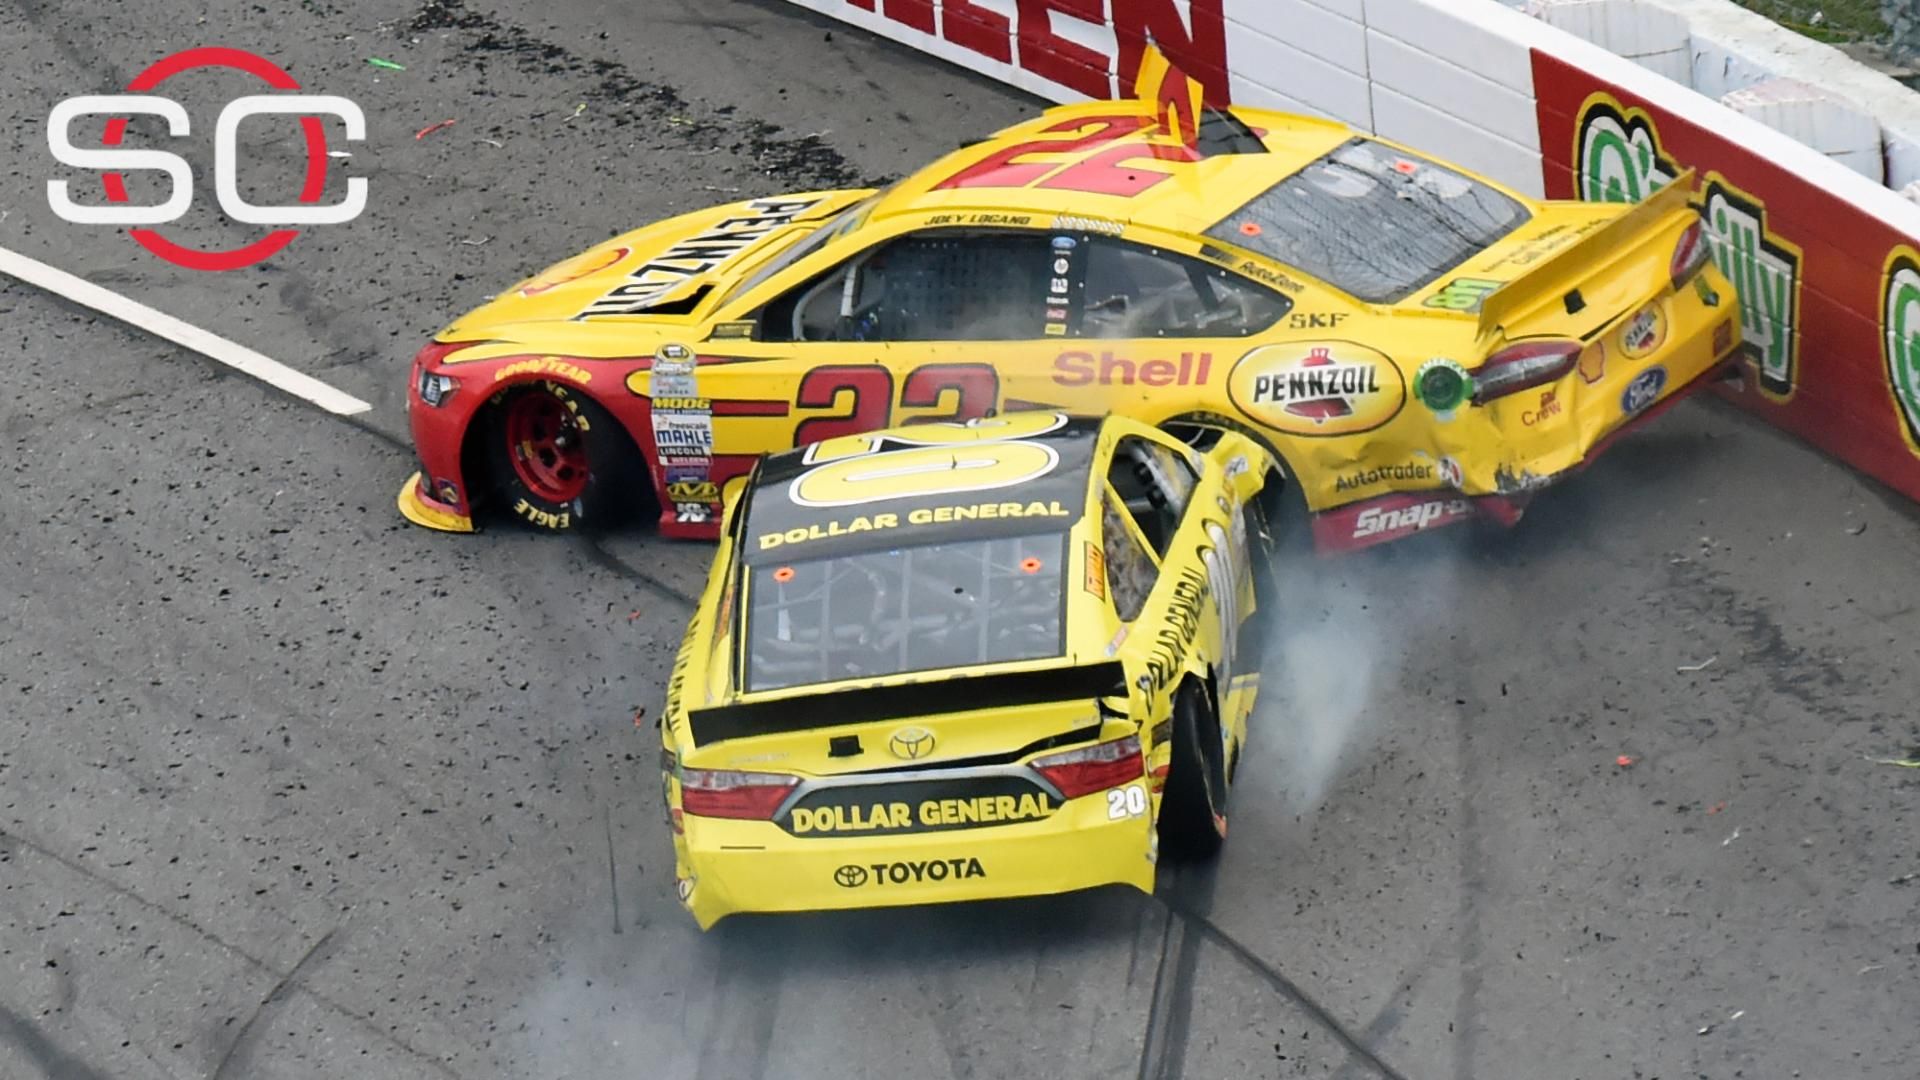 Kenseth suspended for two races after wrecking Logano